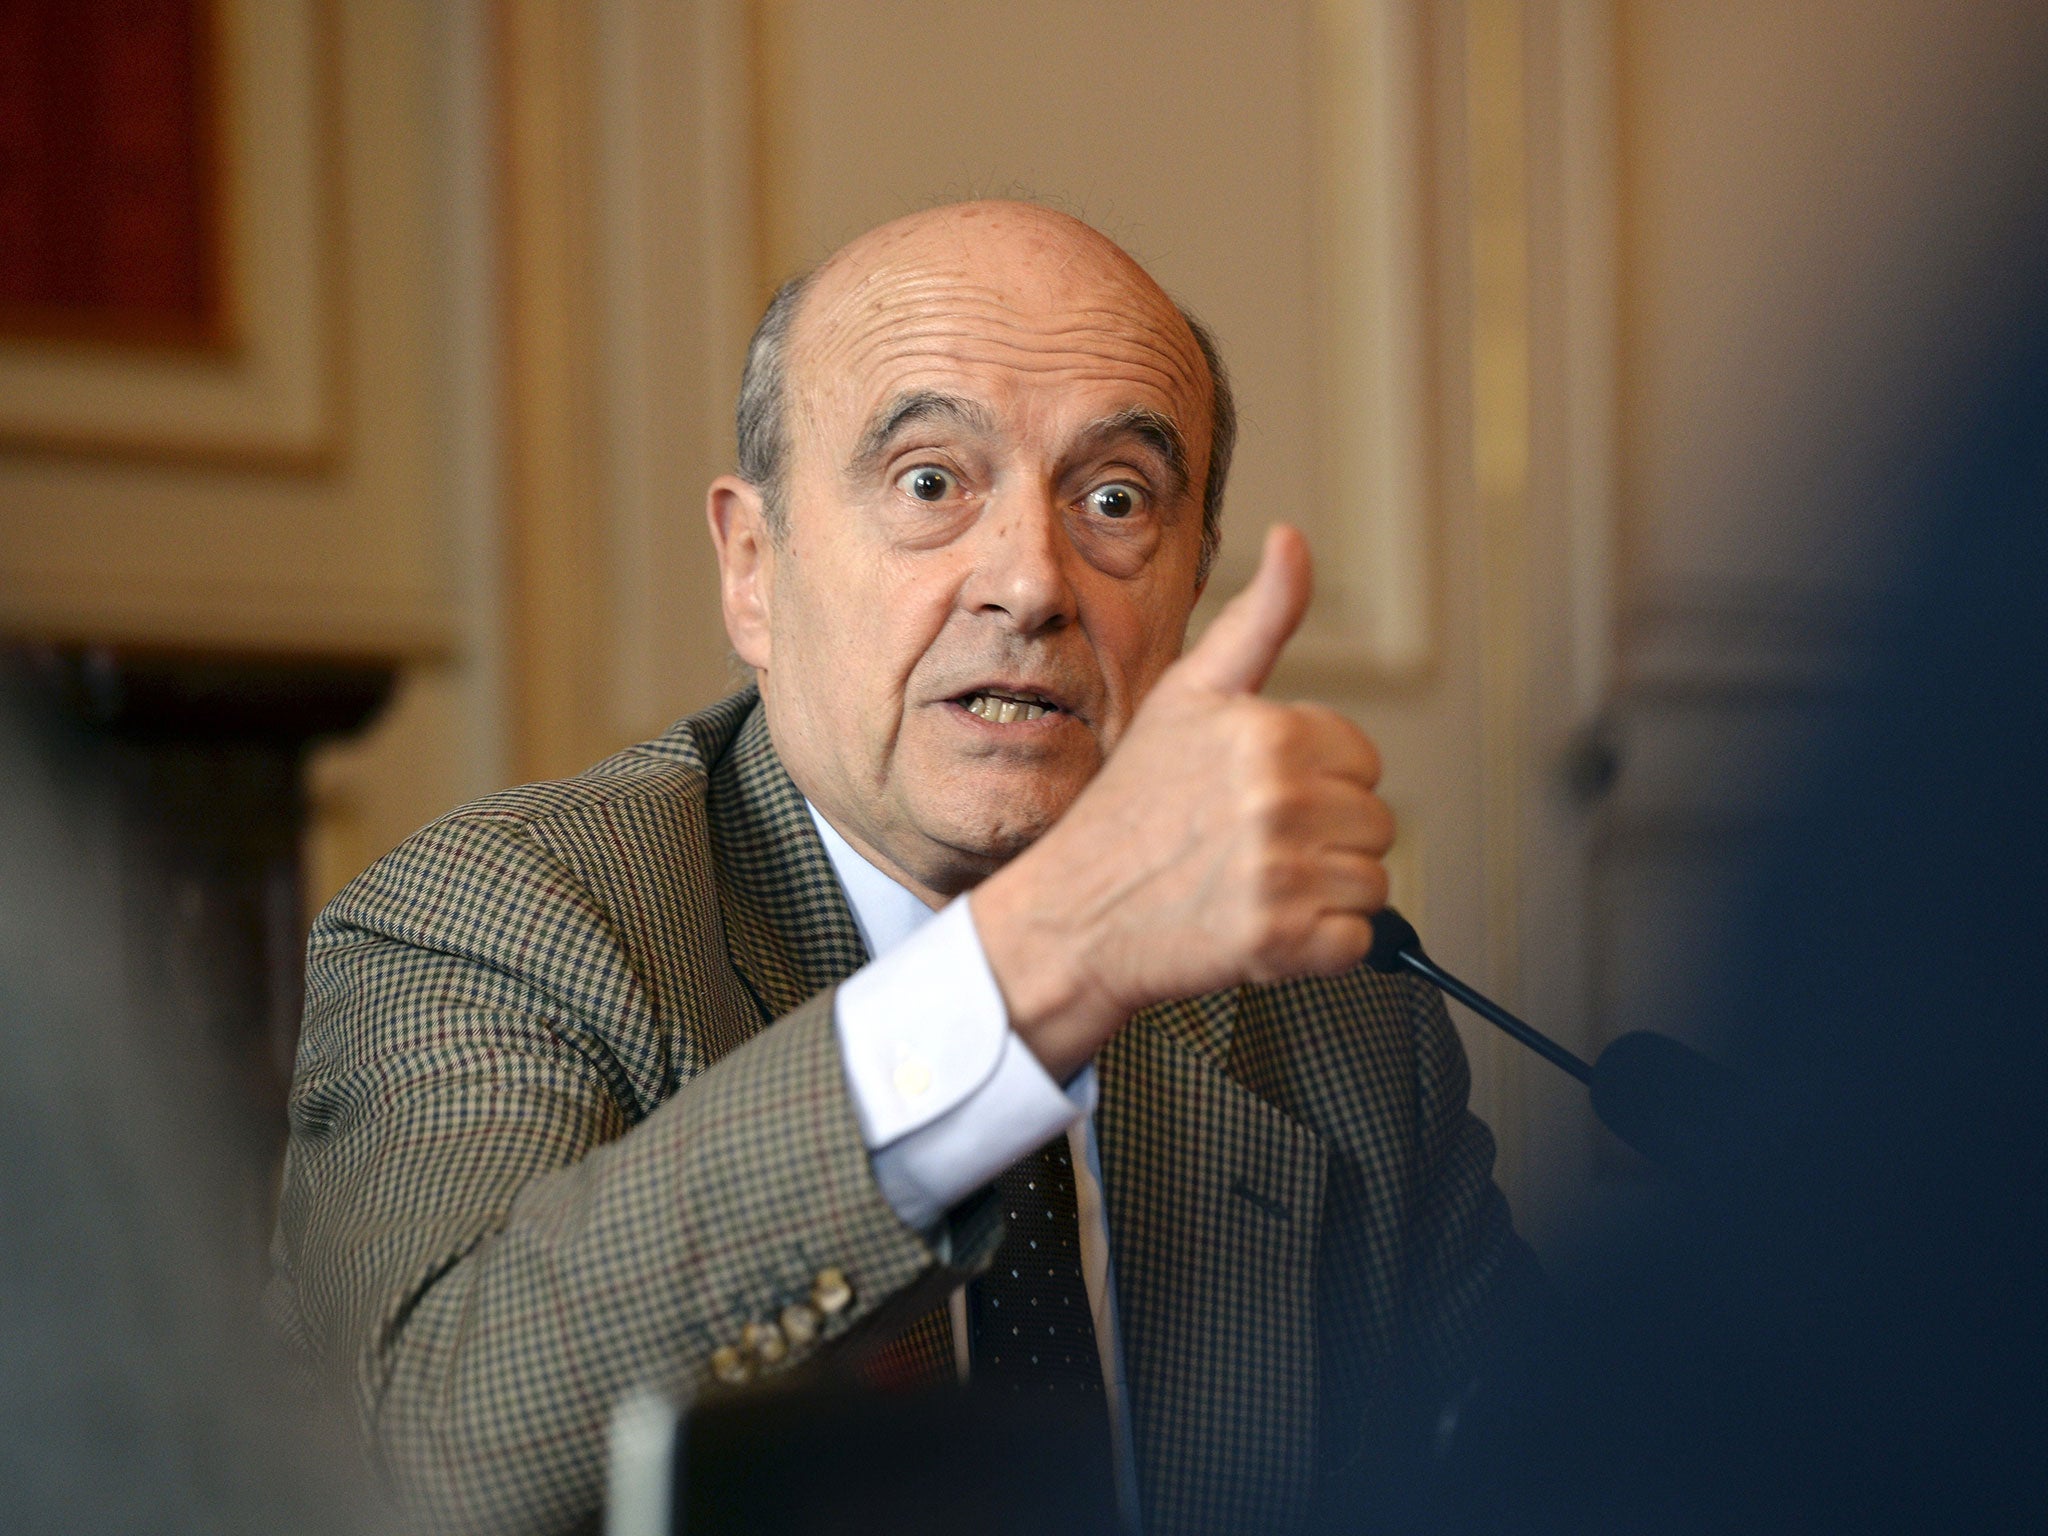 Alain Juppé is concerned the name change would help his political rival